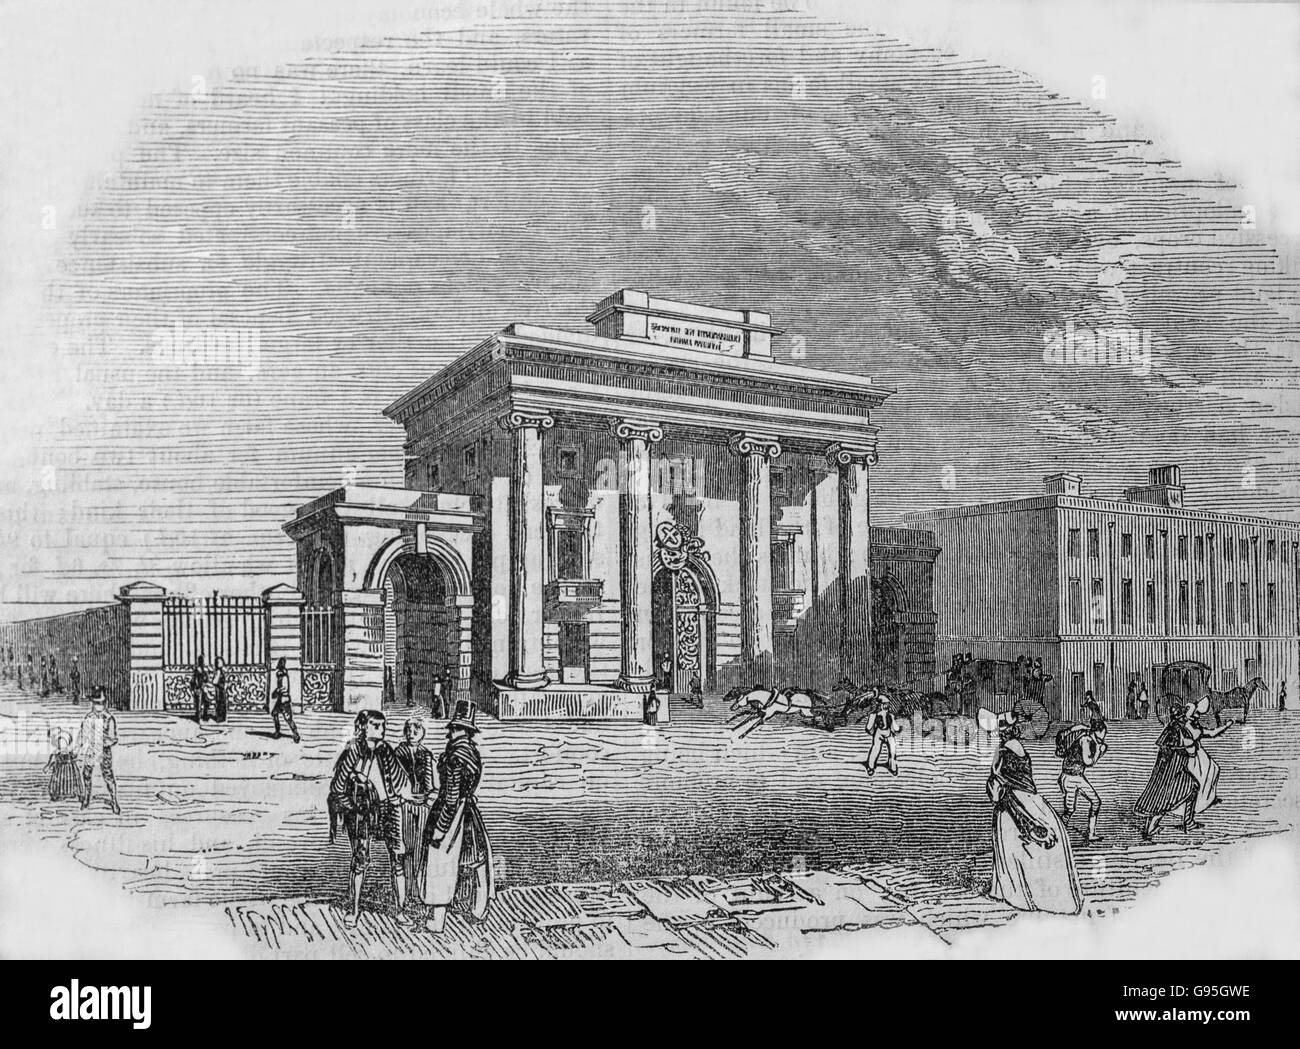 Entrance to the Birmingham Railway Station, Nova Scotia Garden. Mid 19th century engraving. Also known as Curzon Street: The former Principal Building of the Birmingham Terminus for the London-Birmingham Railway. Designed in a Greek Revival style by Philip Hardwick and opened in 1838. Now a Grade 1 listed building. Stock Photo